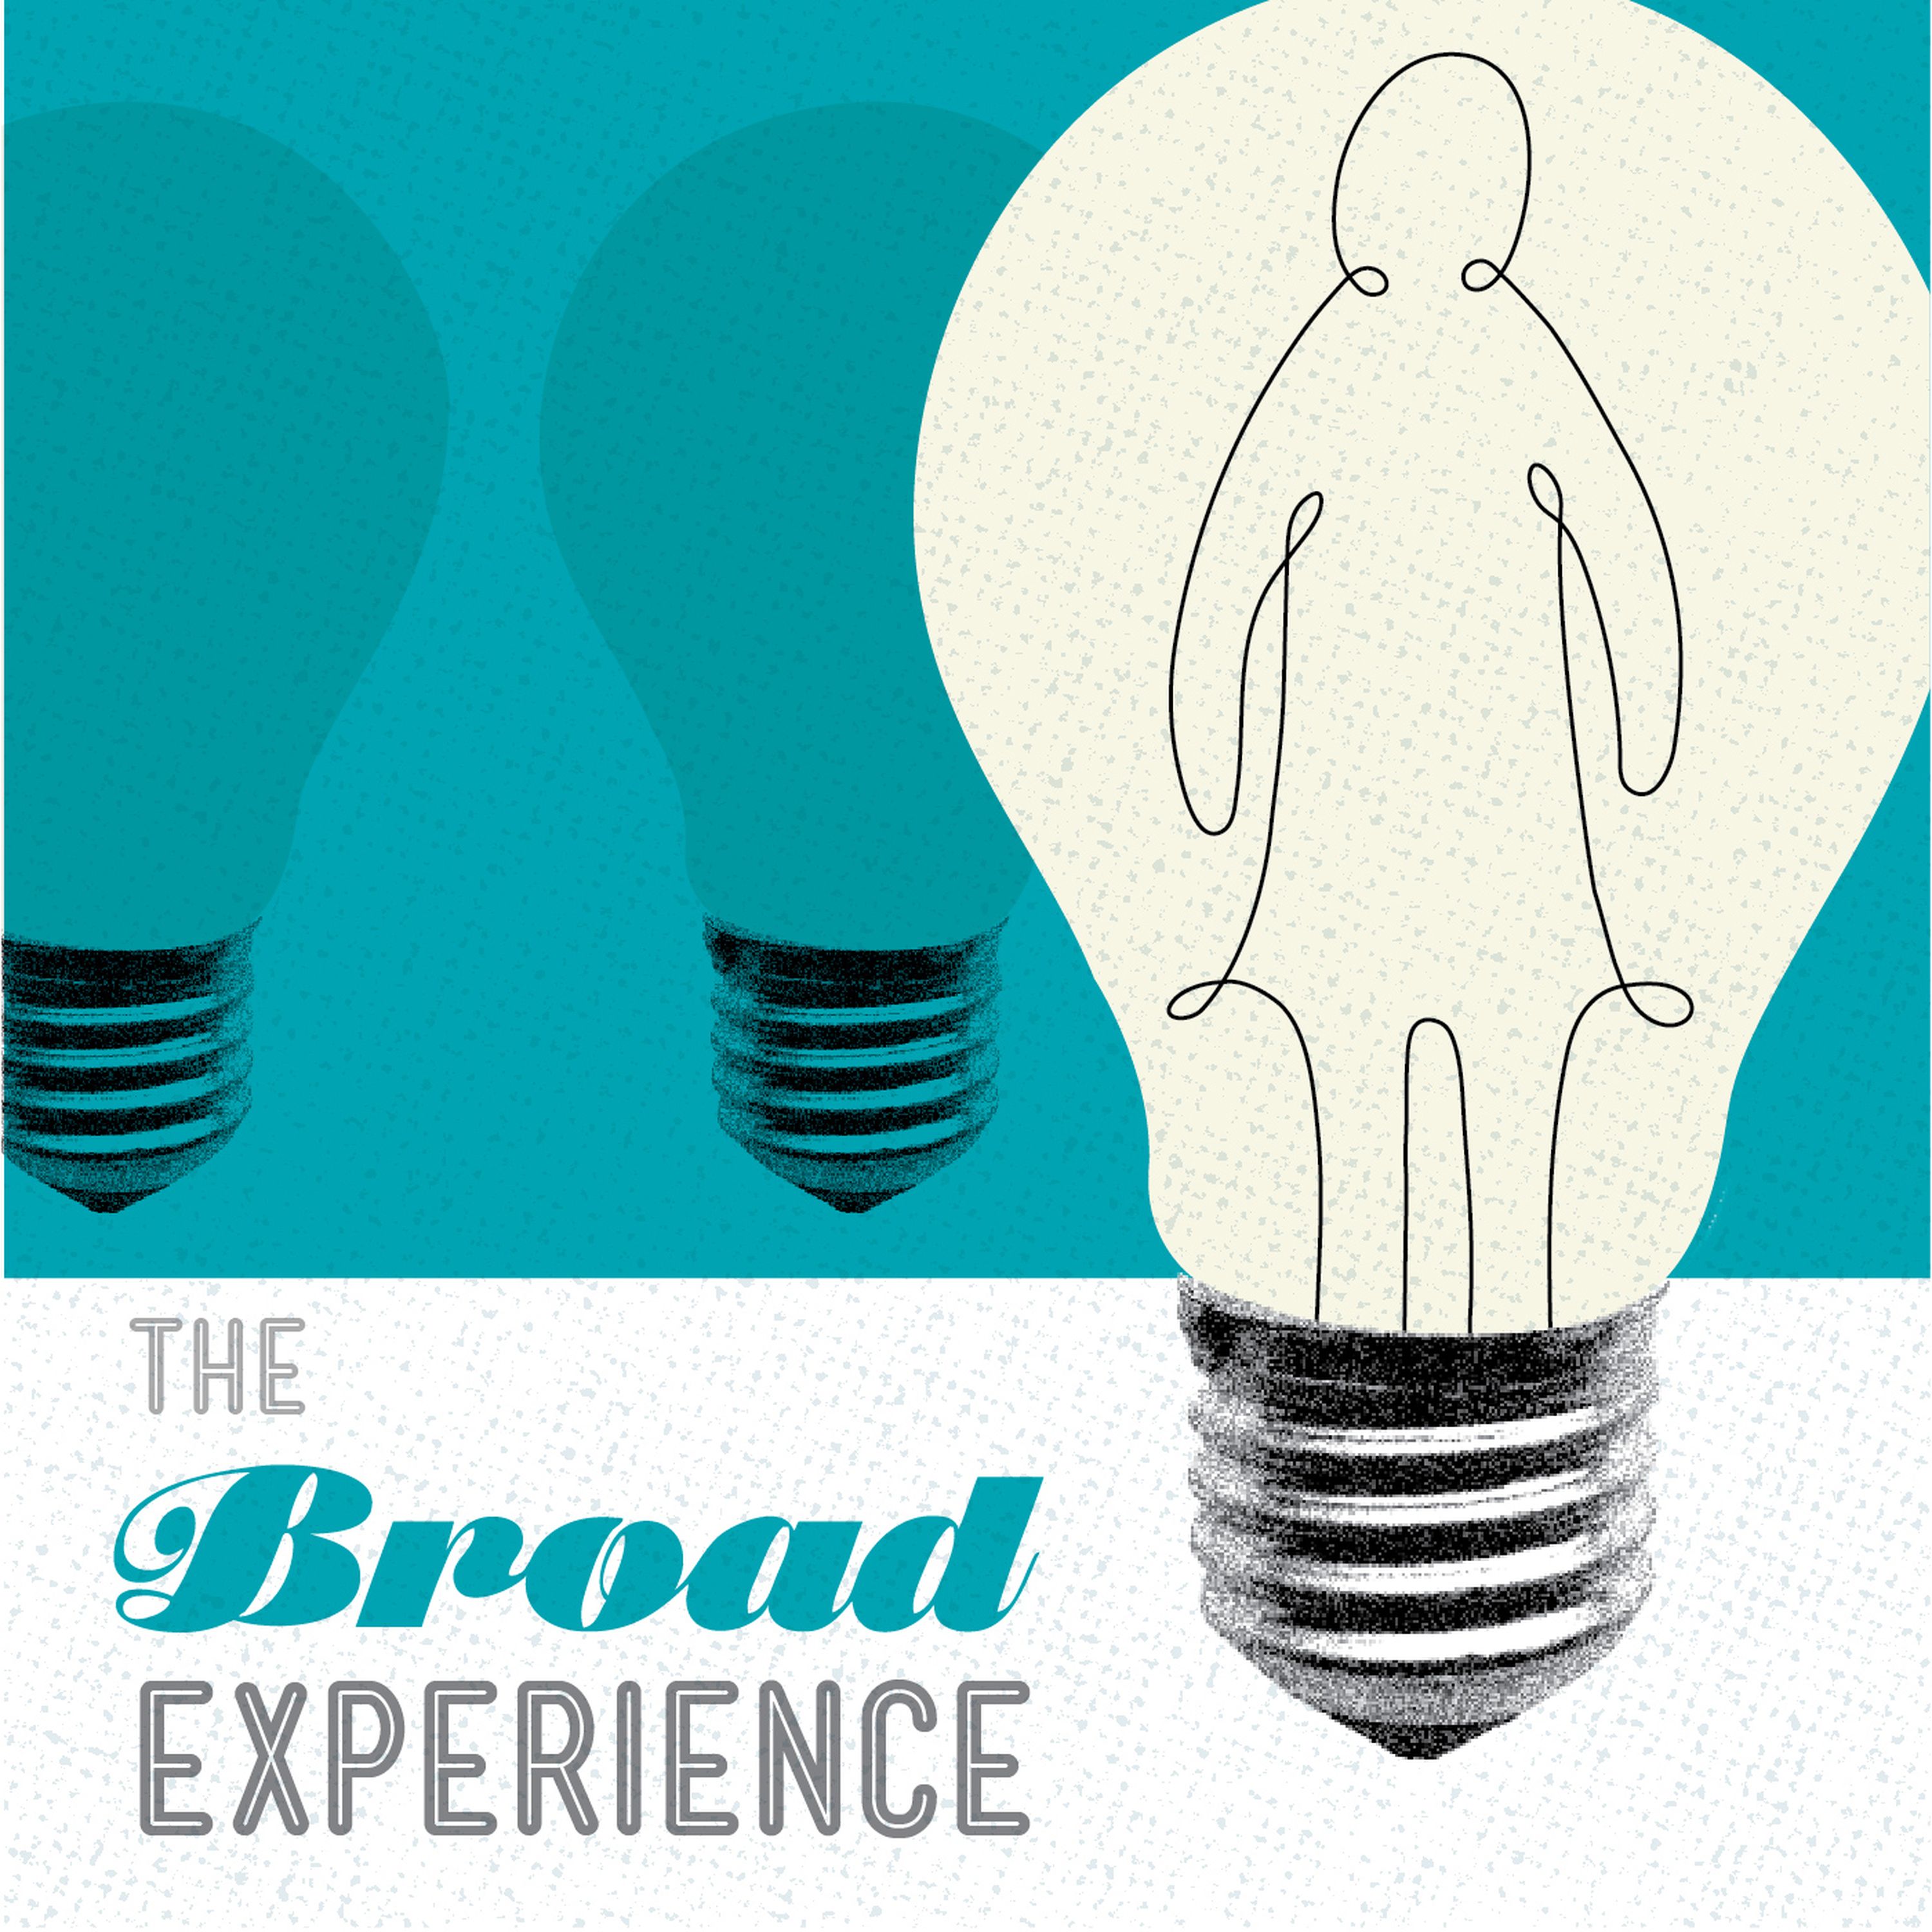 The Broad Experience 55: A difficult decade